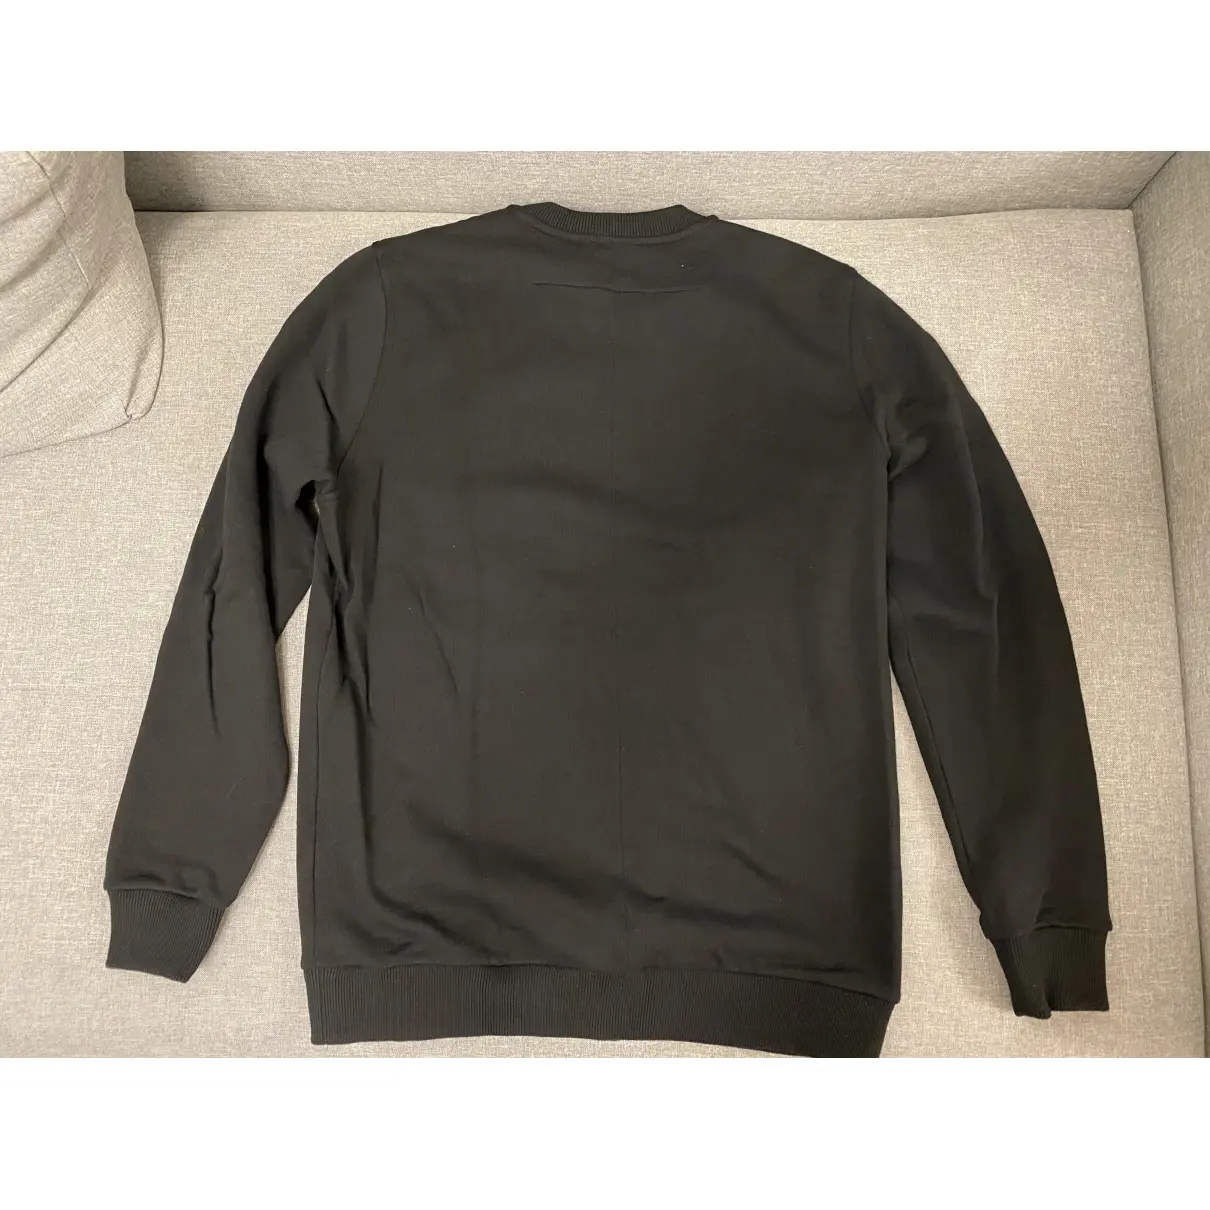 Givenchy Sweatshirt for sale